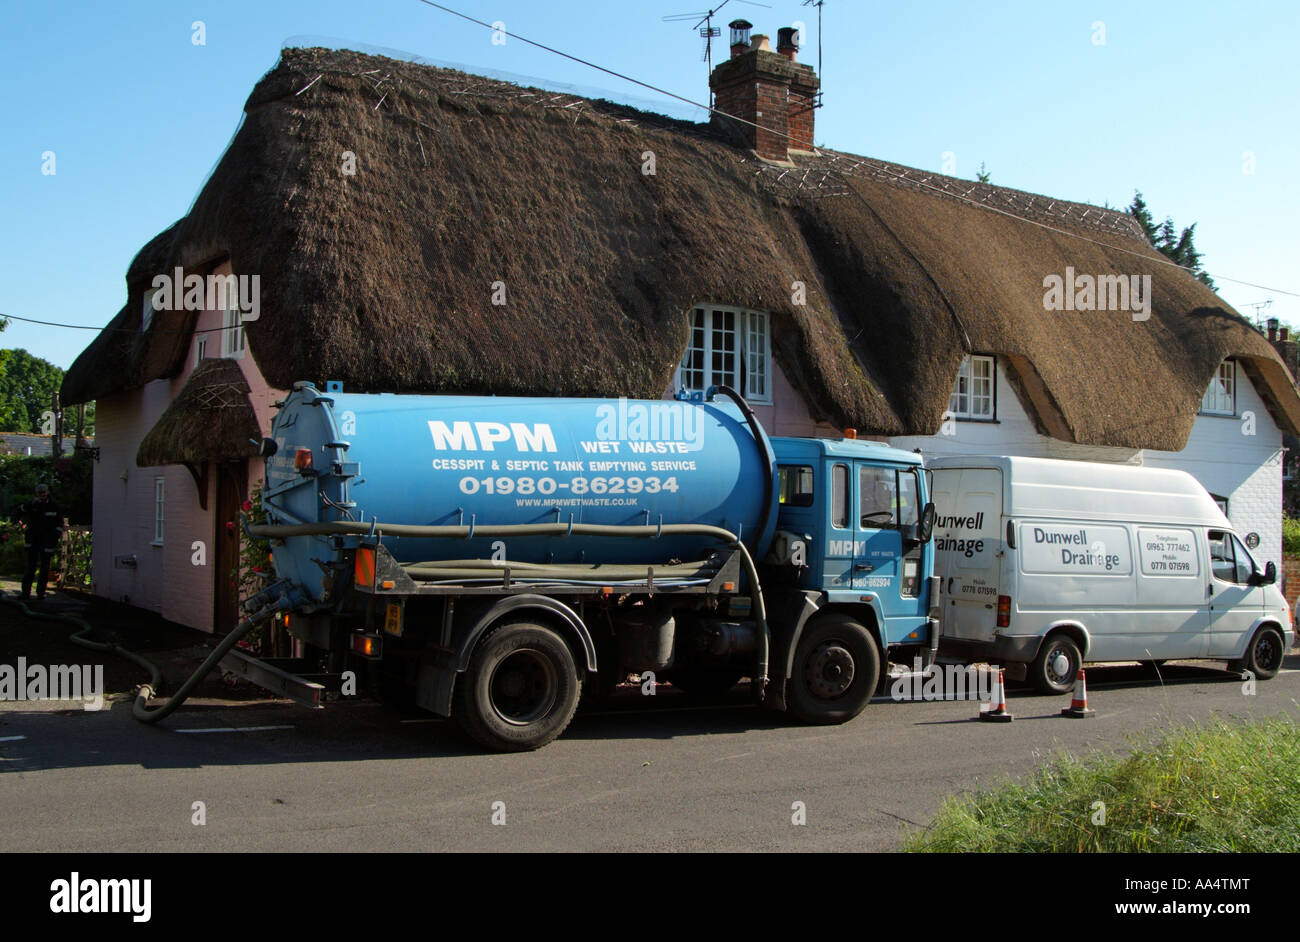 Septic and cesspit emptying service tanker lorry Outside a thatched house England UK Stock Photo